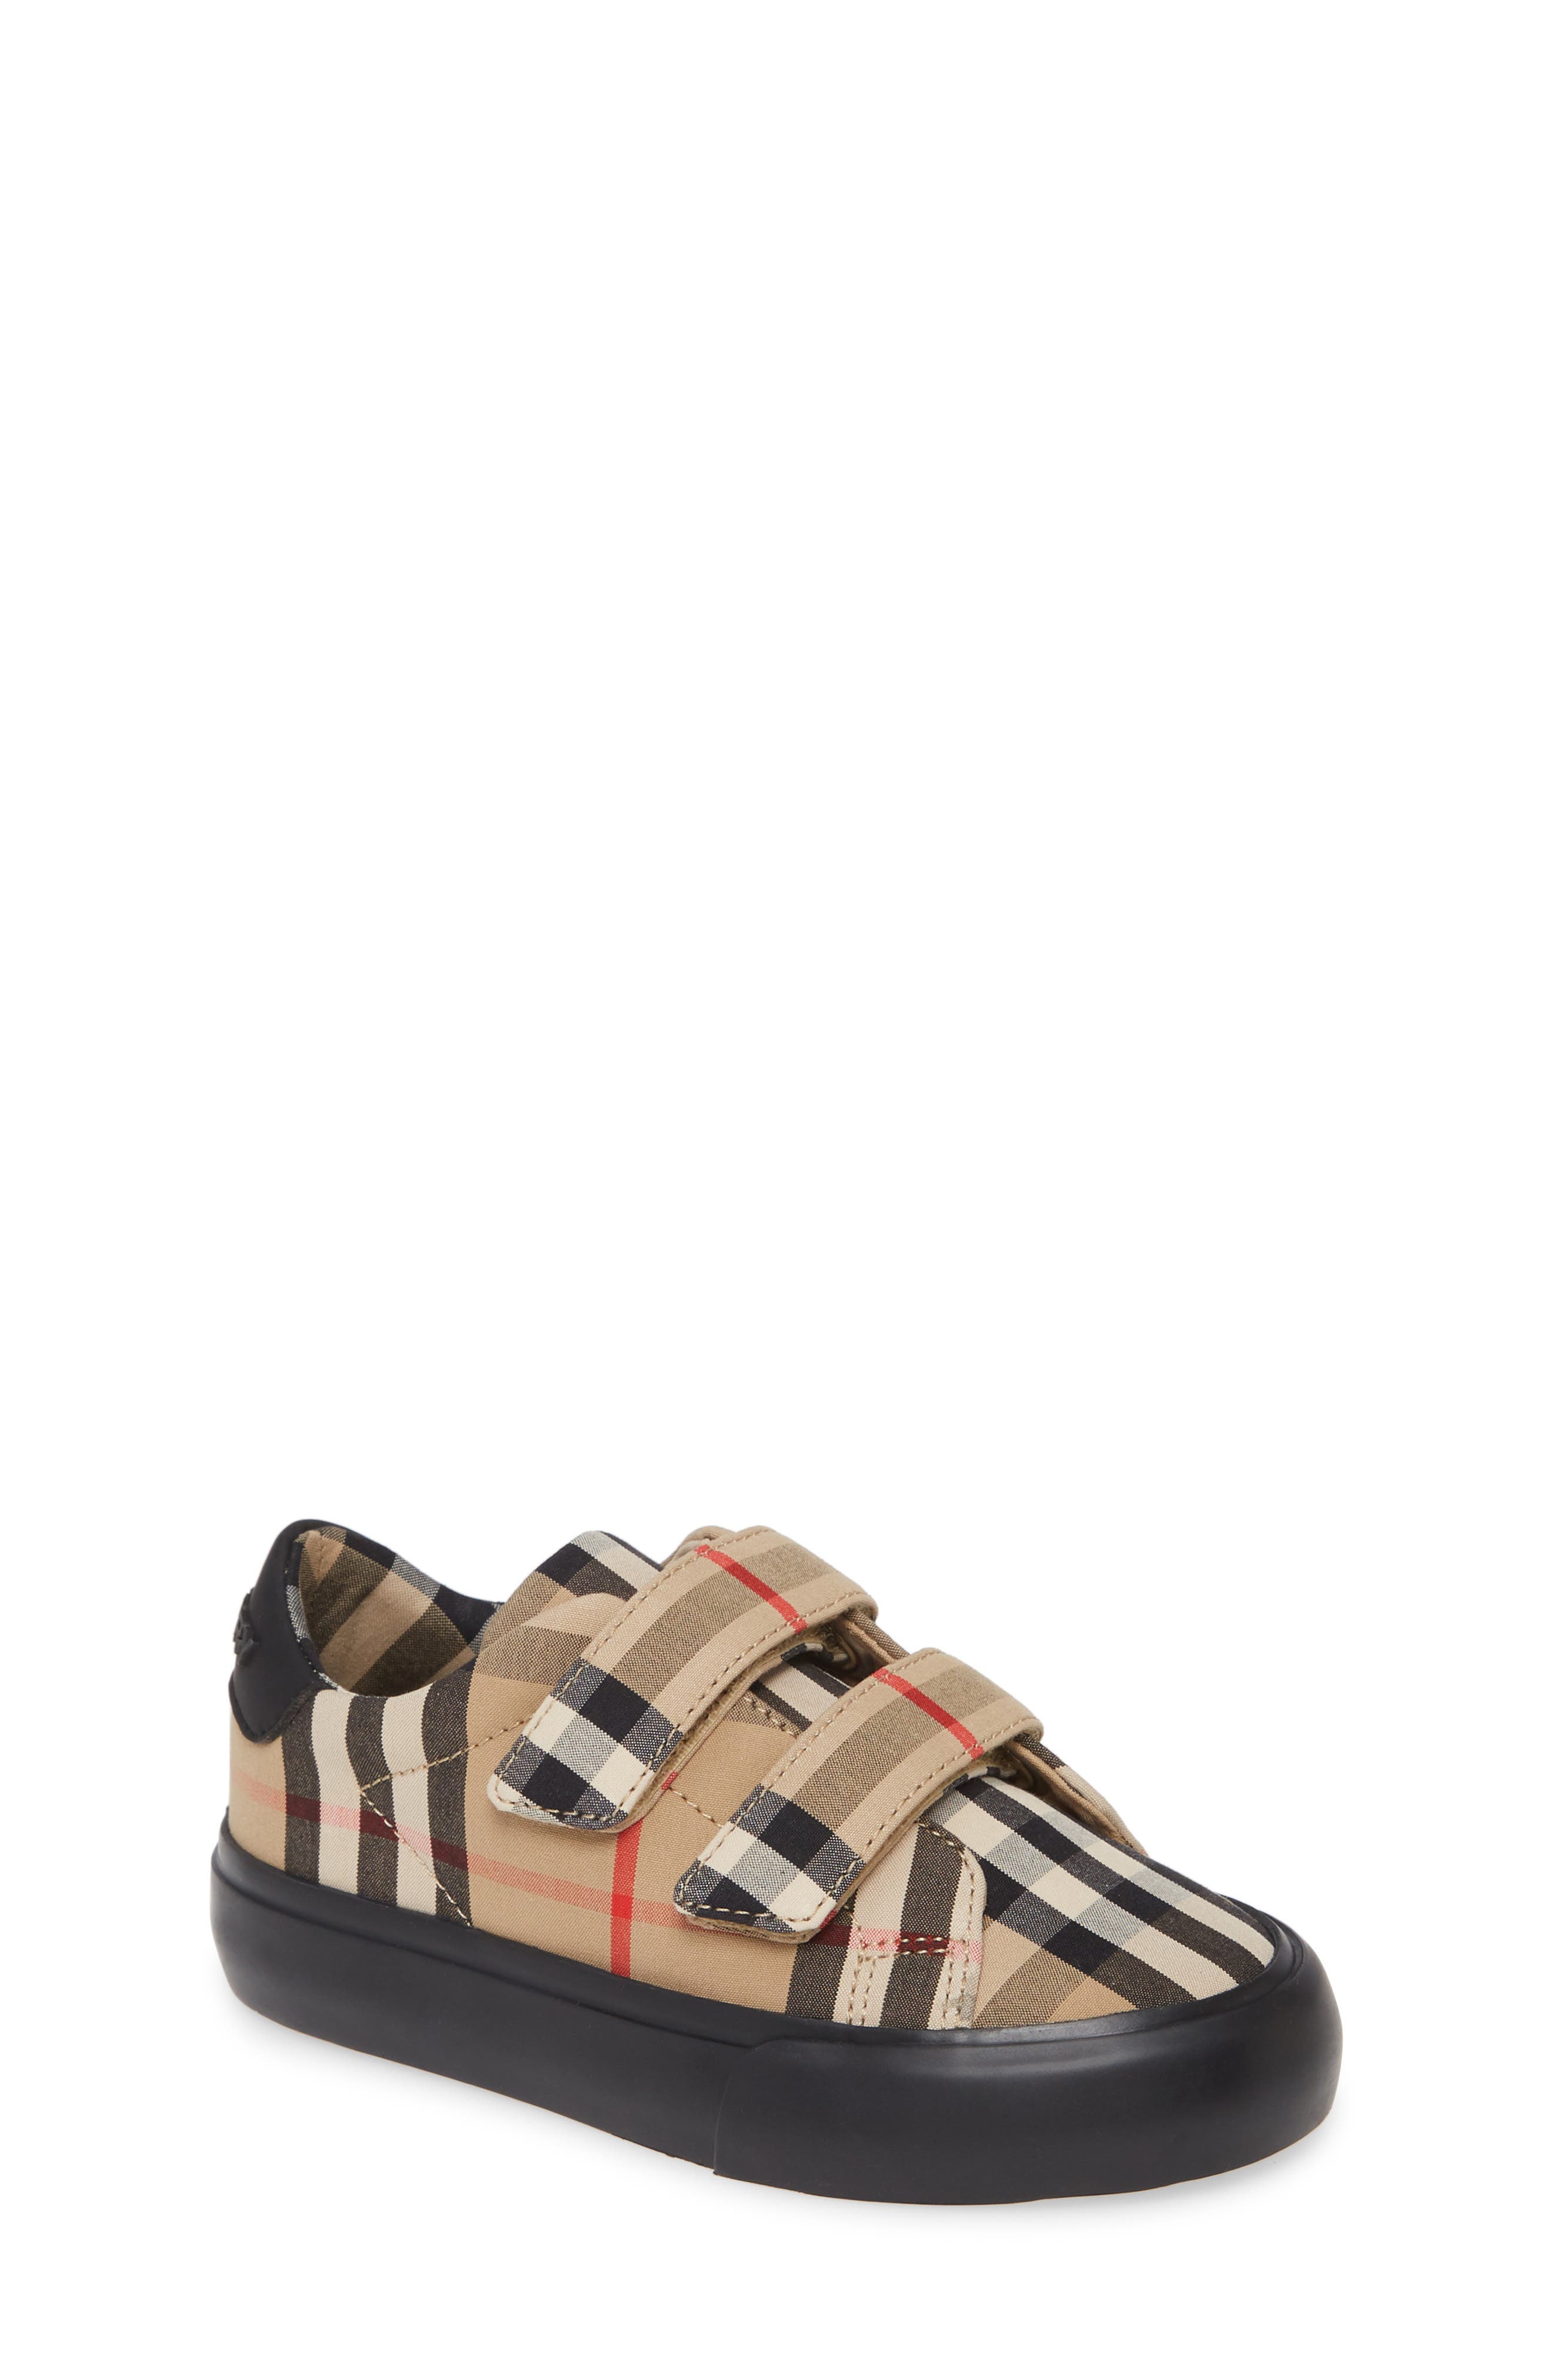 burberry kid shoes